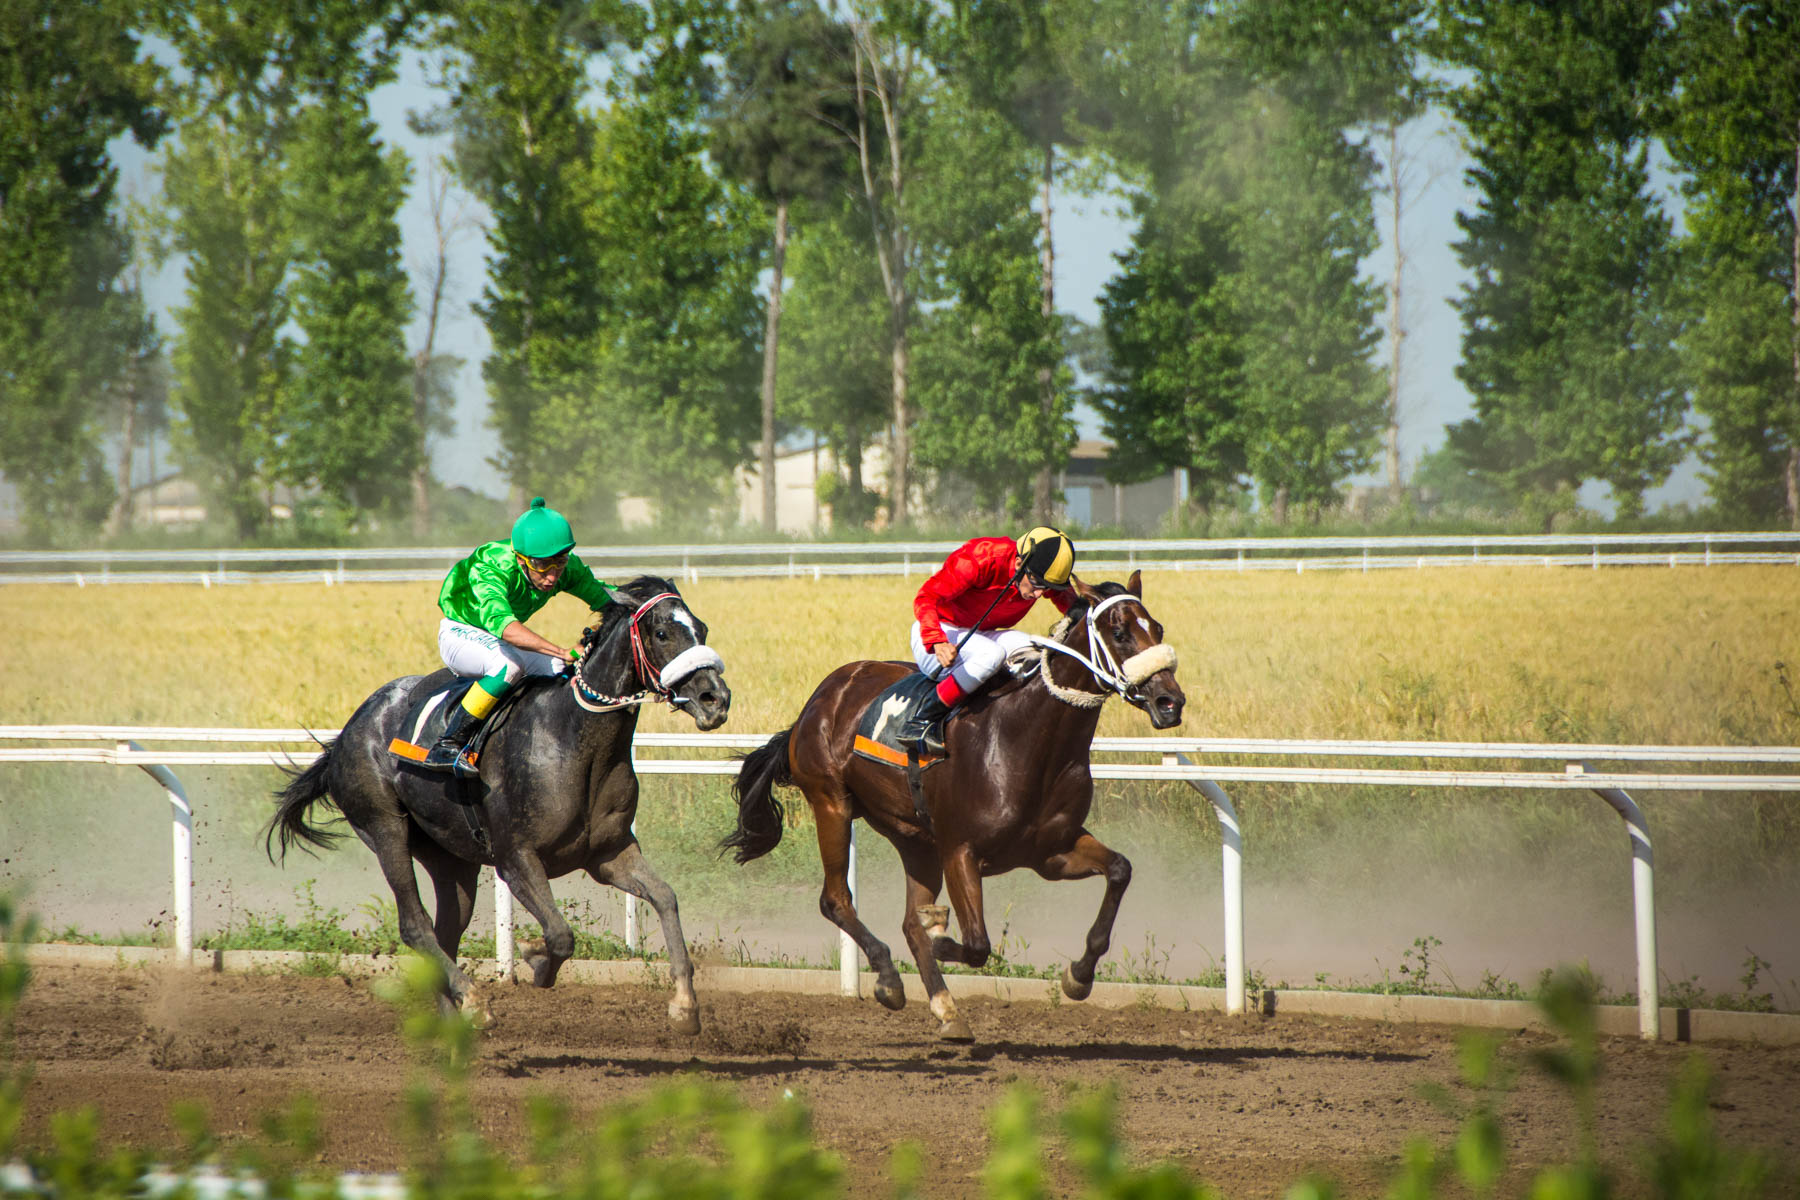 The horse races in Gonbad-e Kavus, a small town in northeastern Iran.